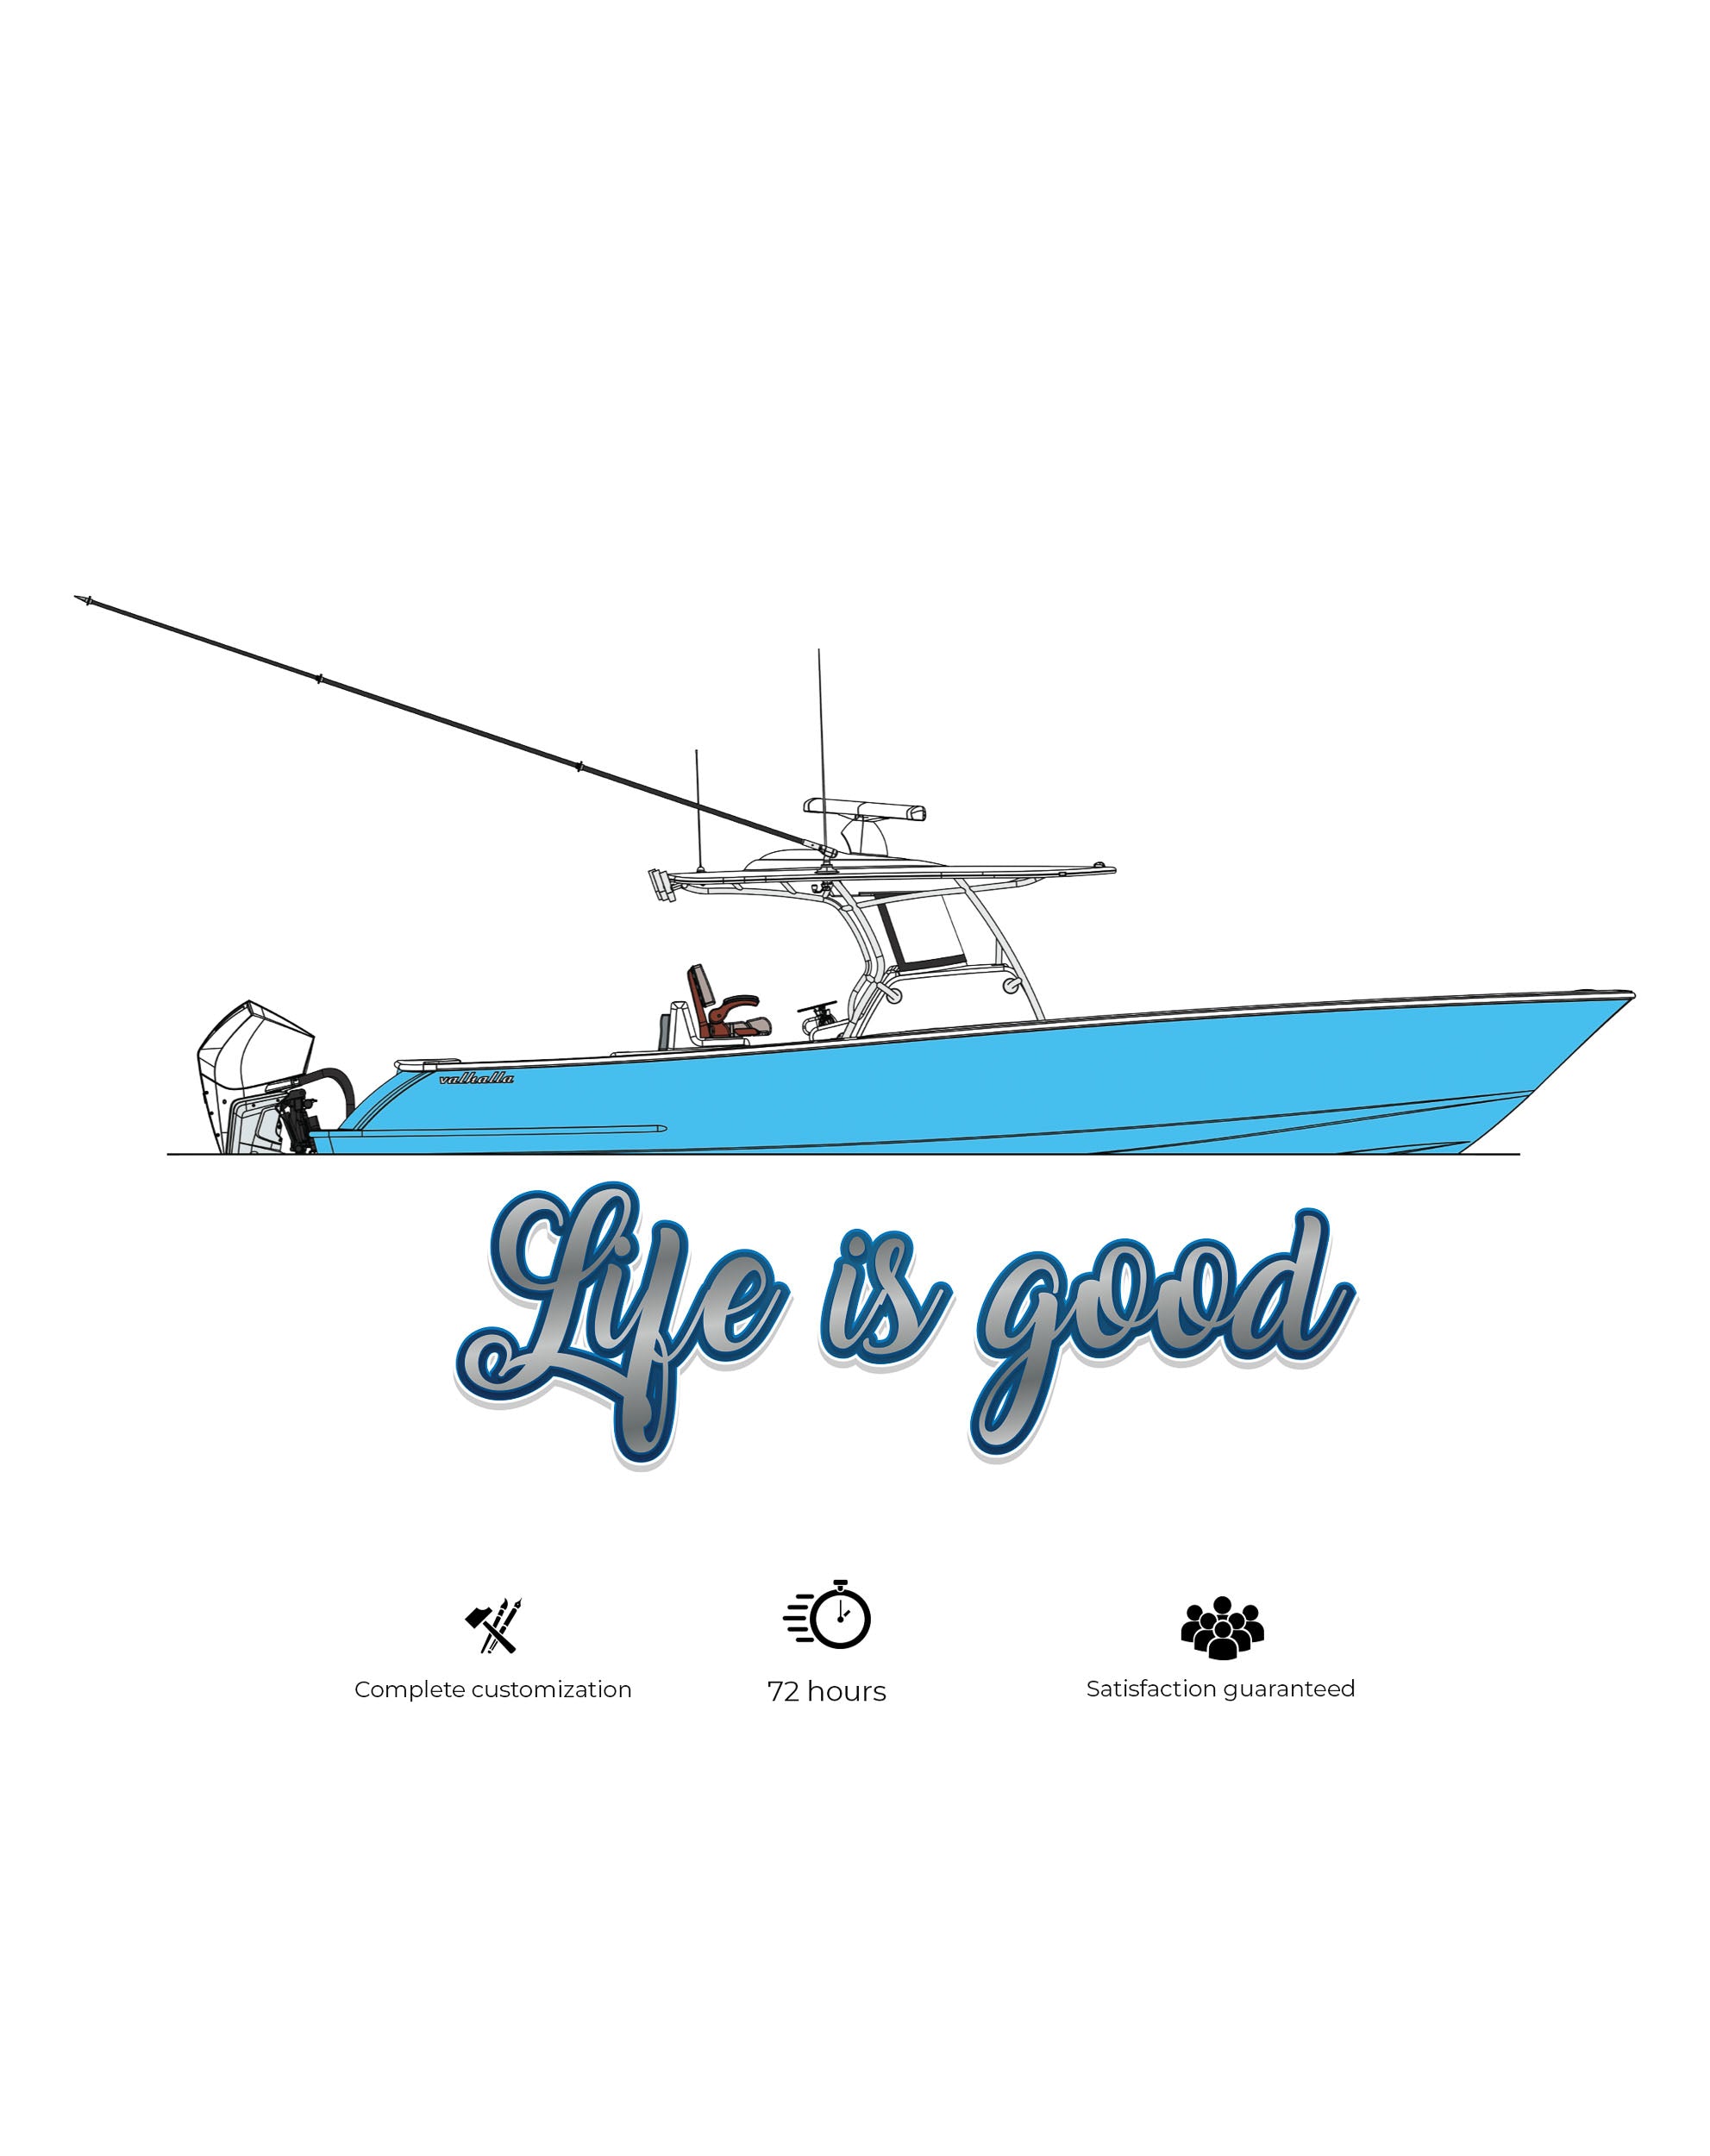 Boat Gadgets and Equipment That Makes Boating A Little Bit More Exciting, by Bendigo Marine AU